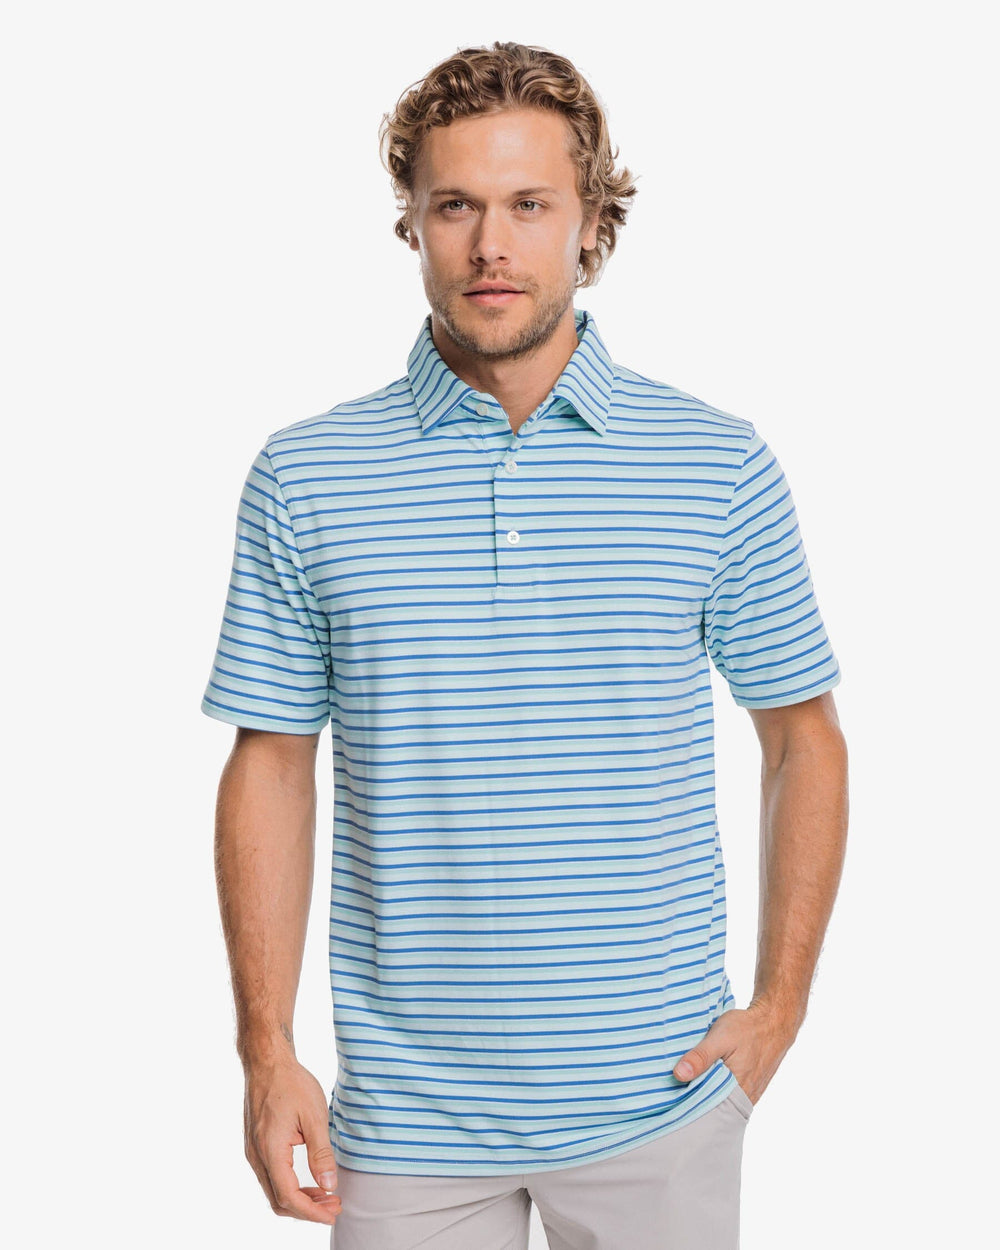 The front view of the Southern Tide Ryder Heather Kendrick Performance Polo Shirt by Southern Tide - Heather Baltic Teal